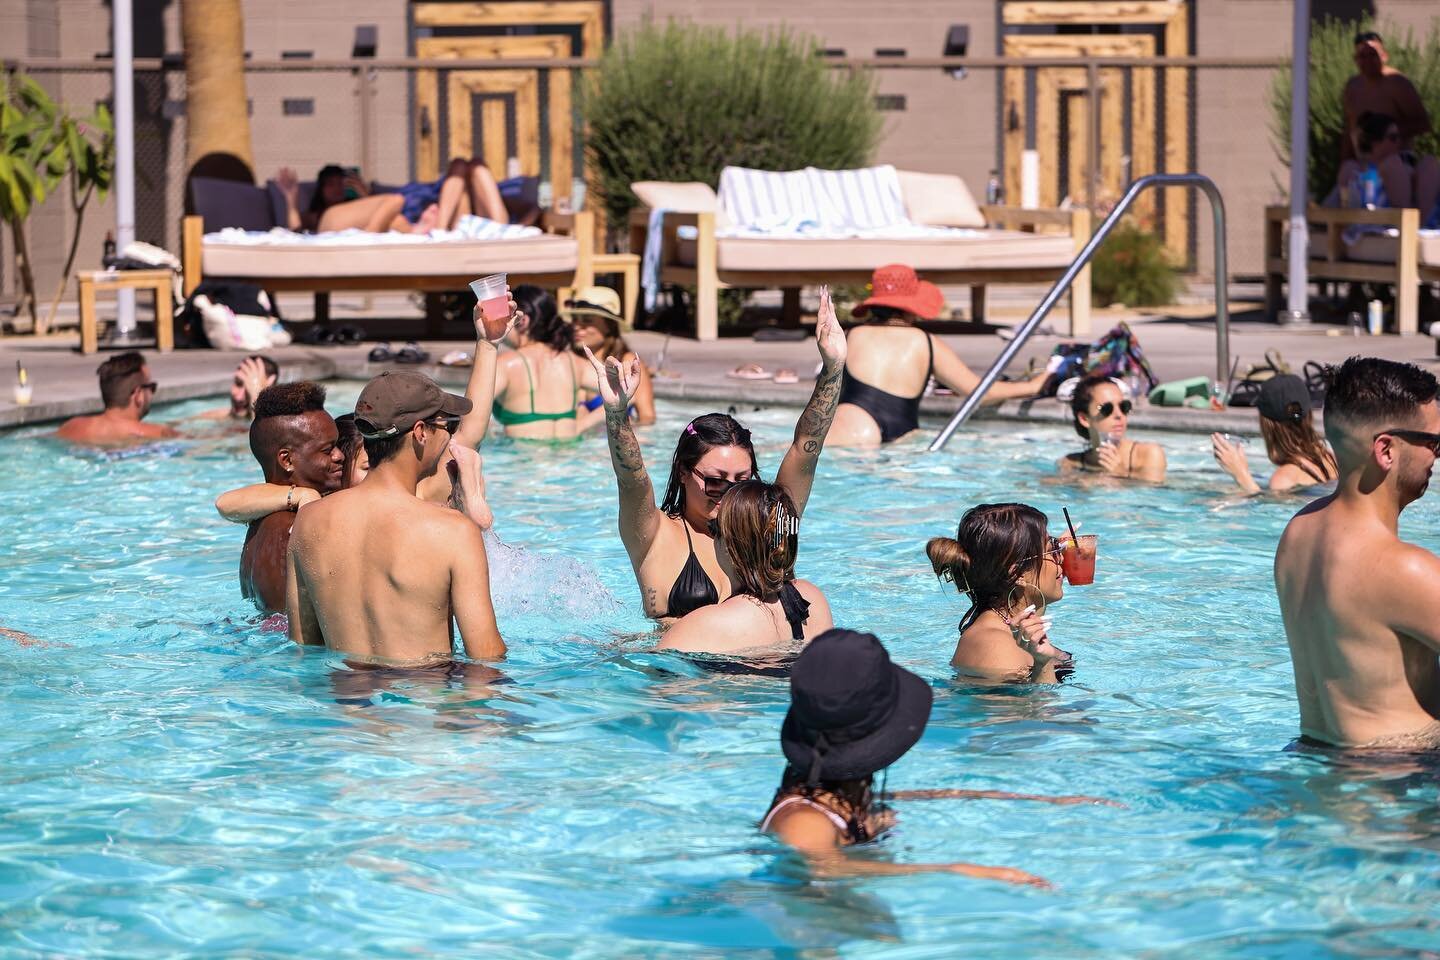 Three more days until the first @alfalpha @vpalmsprings pool party of the season! You won&rsquo;t want to miss this event, trust me. Great music, drinks, food and sunshine in the perfect desert getaway. Bring some shades, swimwear and dance moves thi